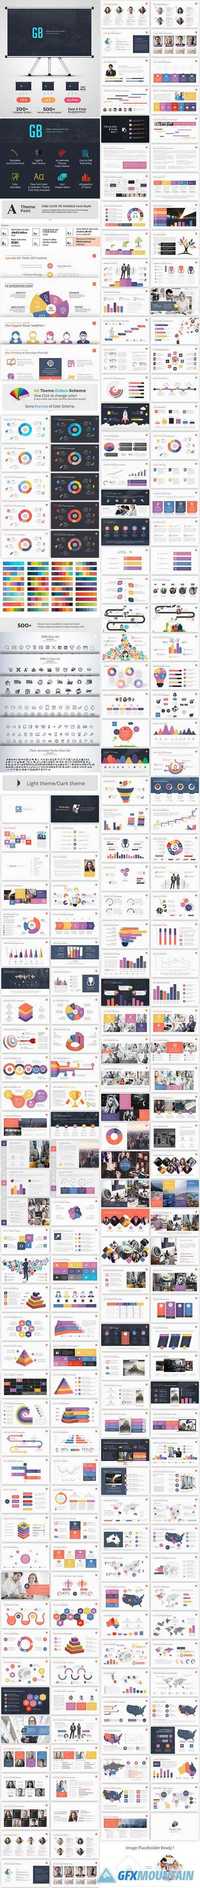 Graphicriver - Global Business Power Point Presentation 12518004